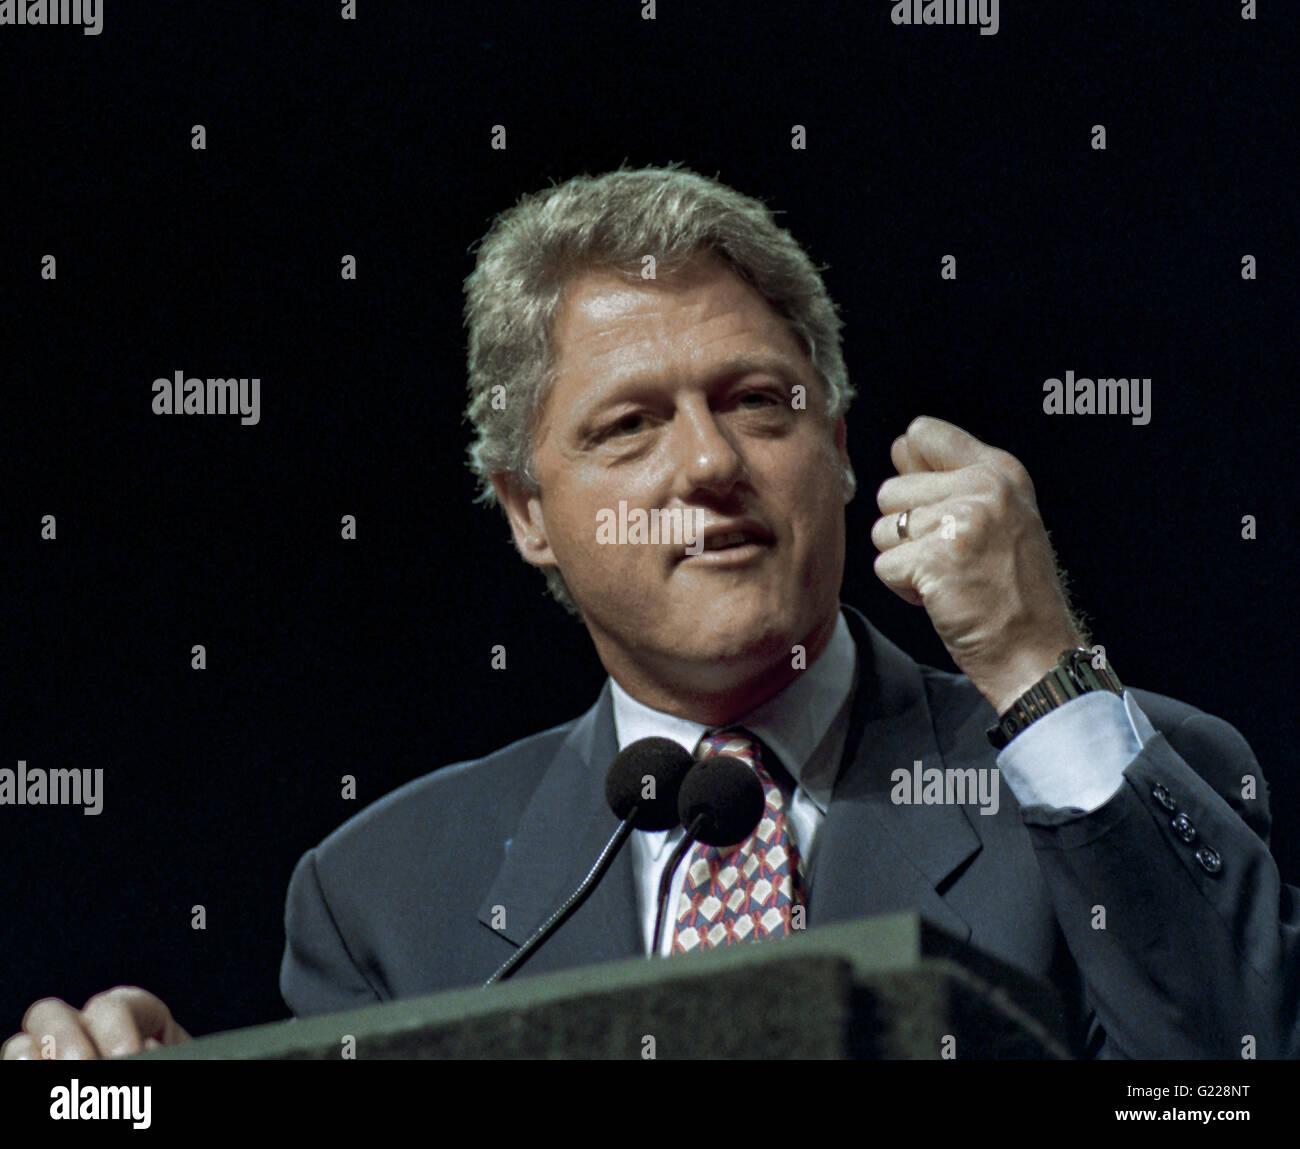 Democratic candidate Governor William Clinton delivers his campaign stump speech at Cobo Hall Detroit  Credit: Mark Reinstein Stock Photo